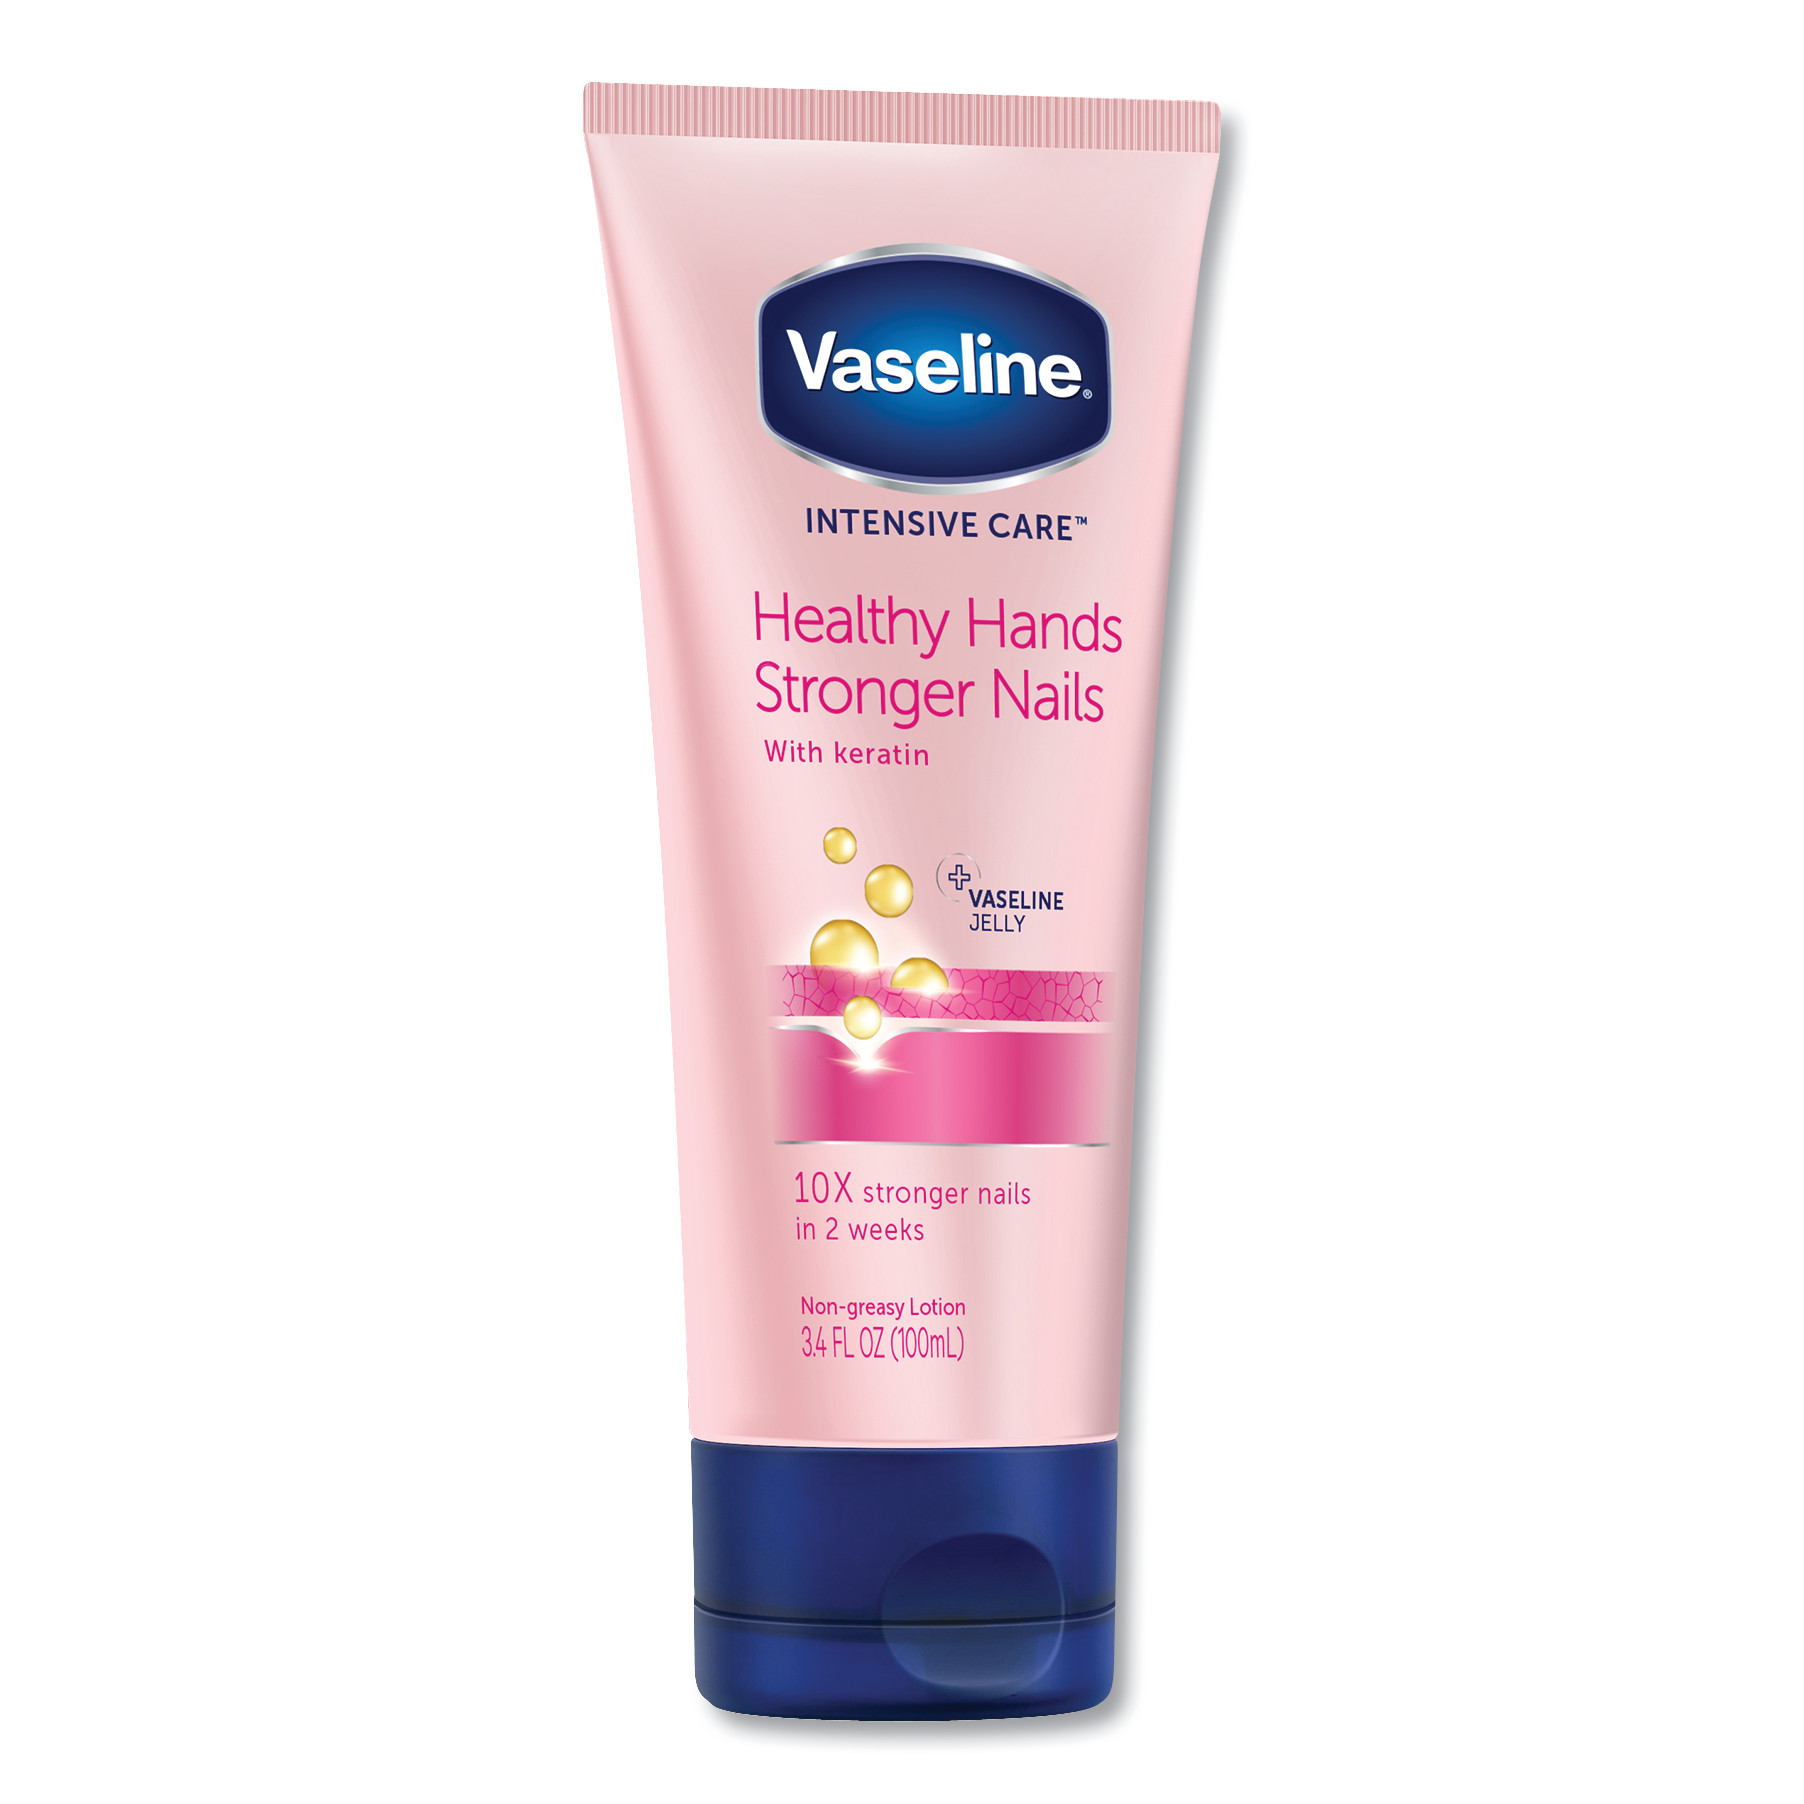  Vaseline 04183CT Intensive Care Healthy Hands Stronger Nails Lotion, 3.4 oz Squeeze Tube, 12/Carton (UNI04183CT) 